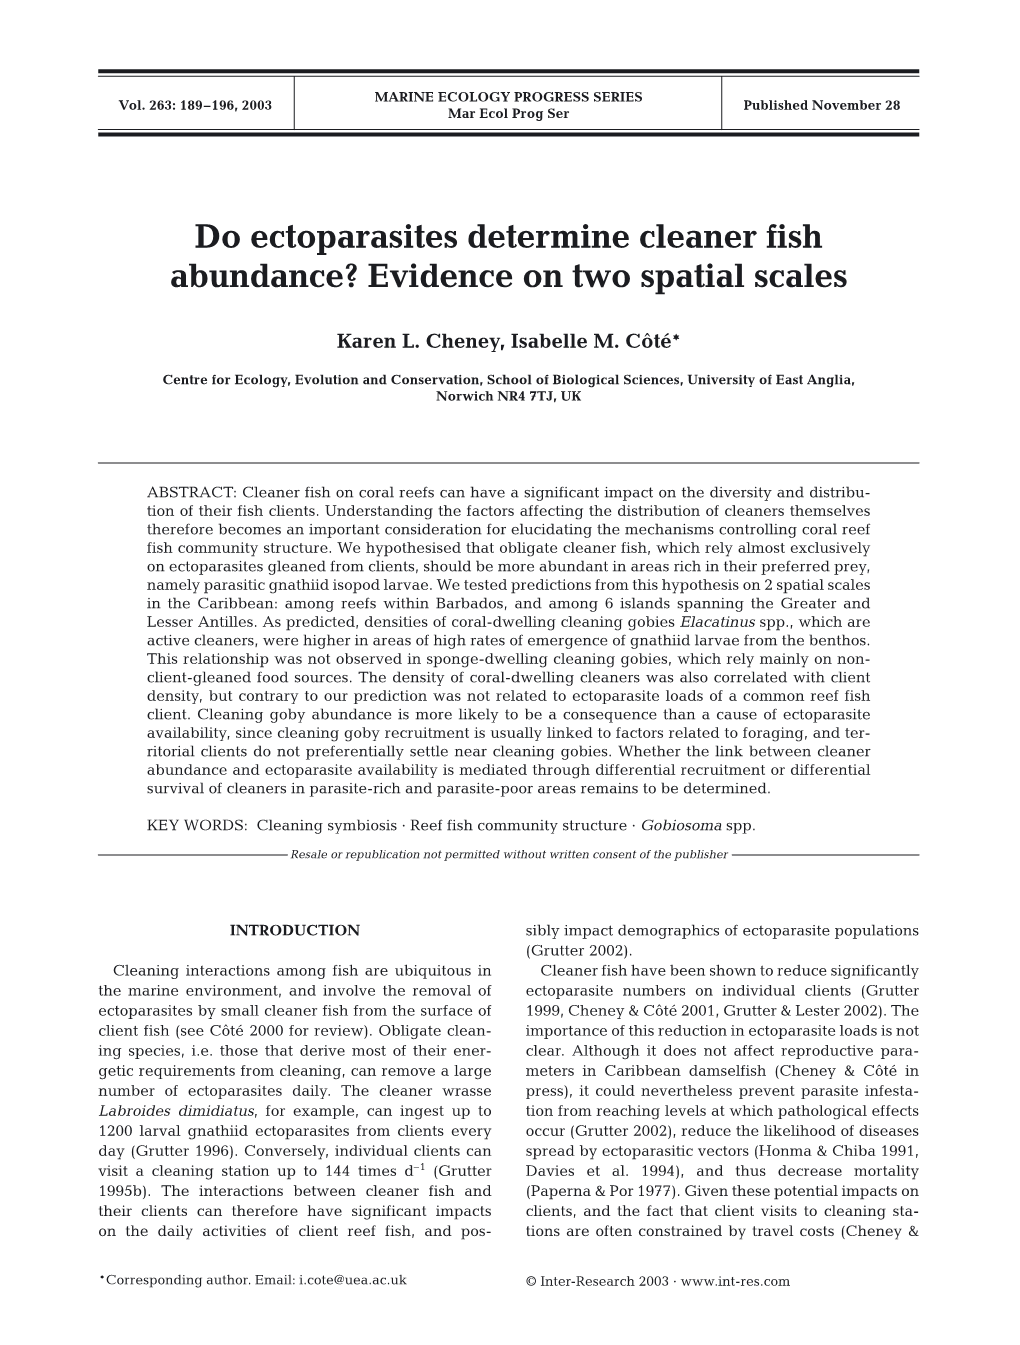 Do Ectoparasites Determine Cleaner Fish Abundance? Evidence on Two Spatial Scales